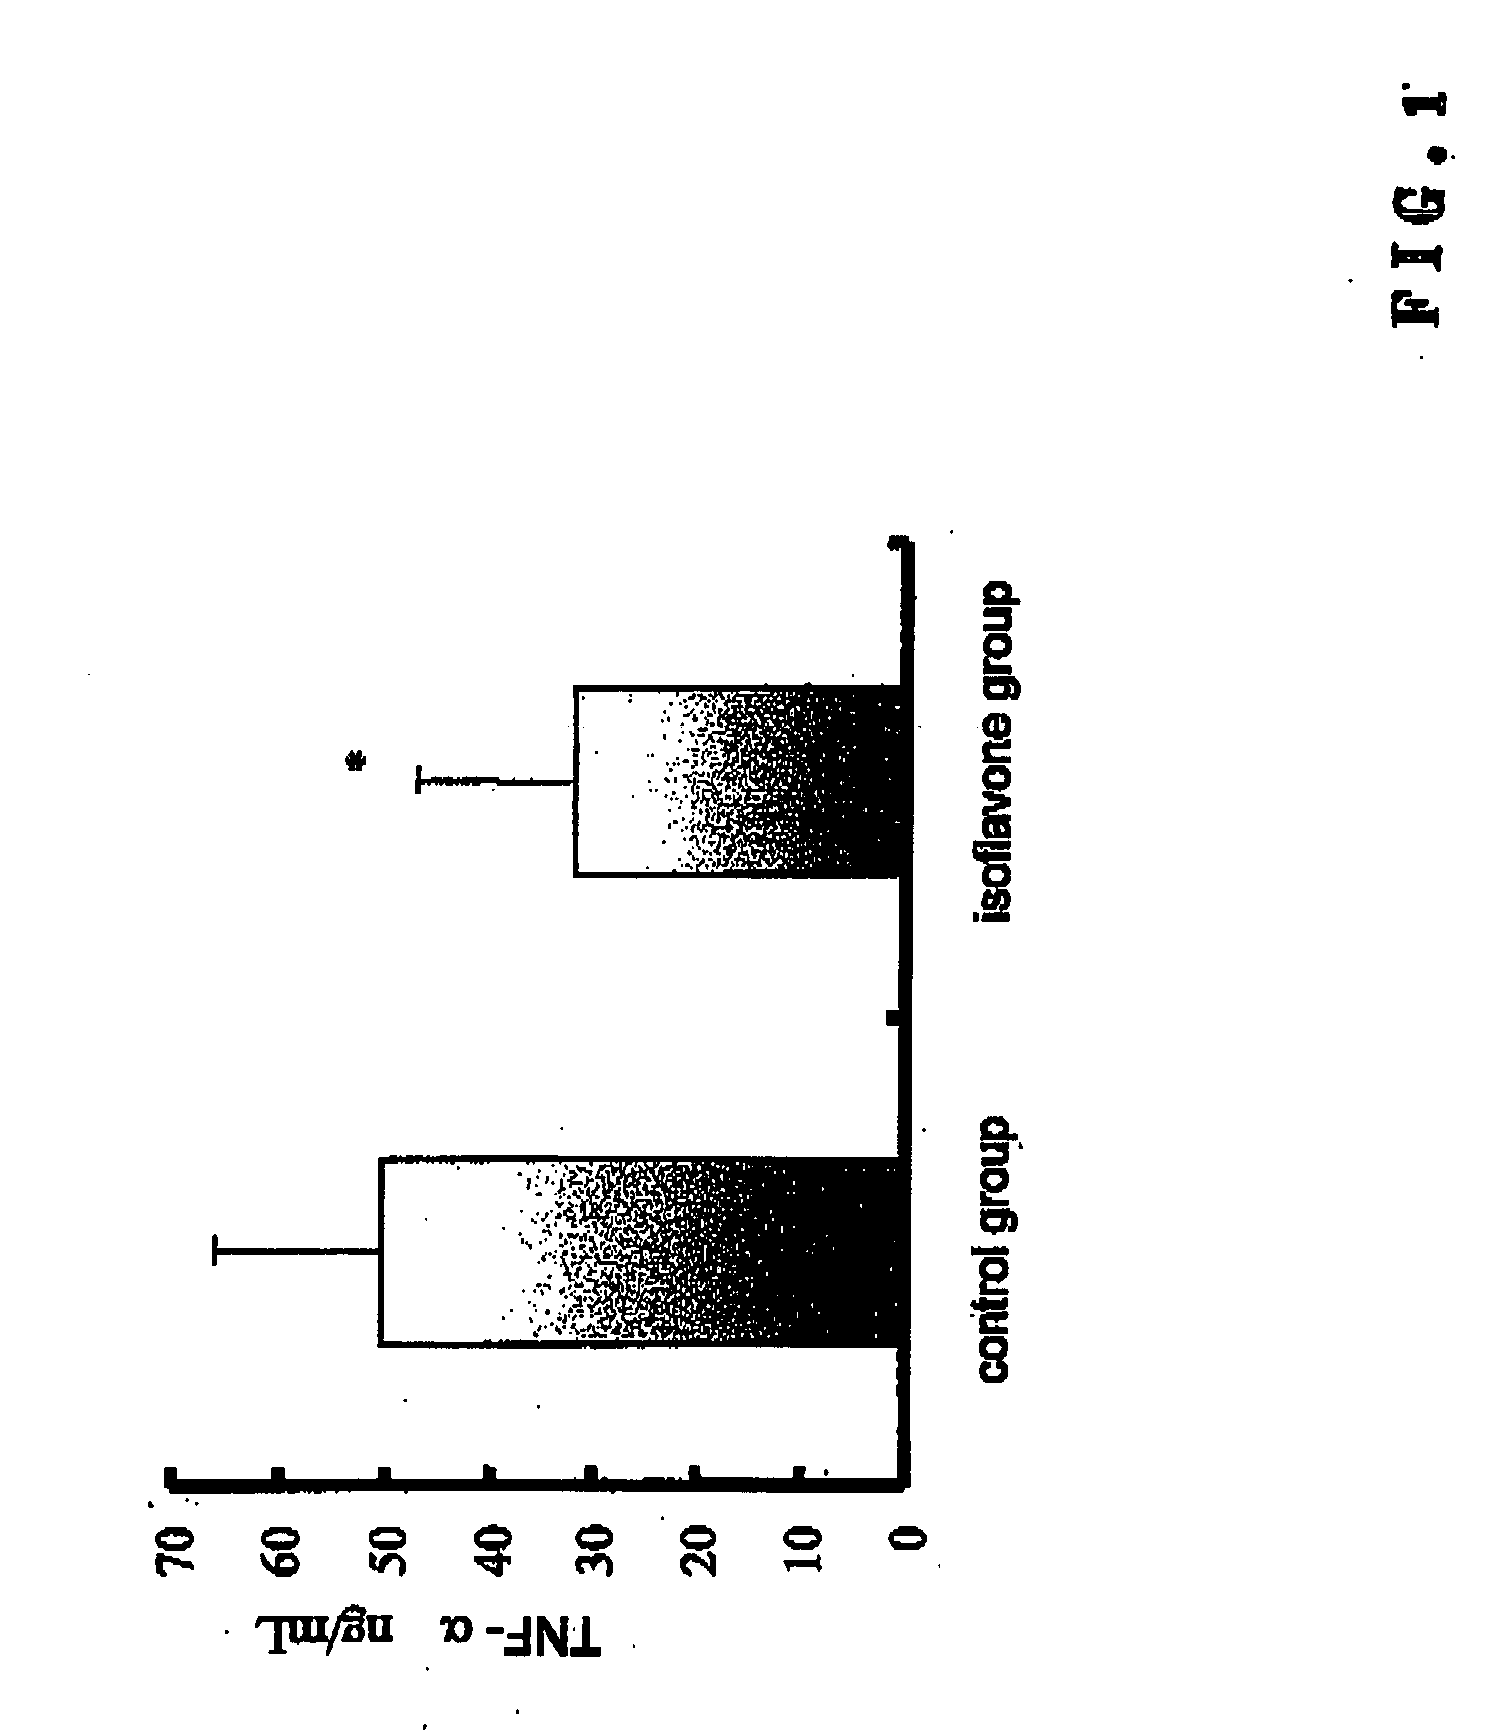 Agent for the prevention and/or treatment of septicemia